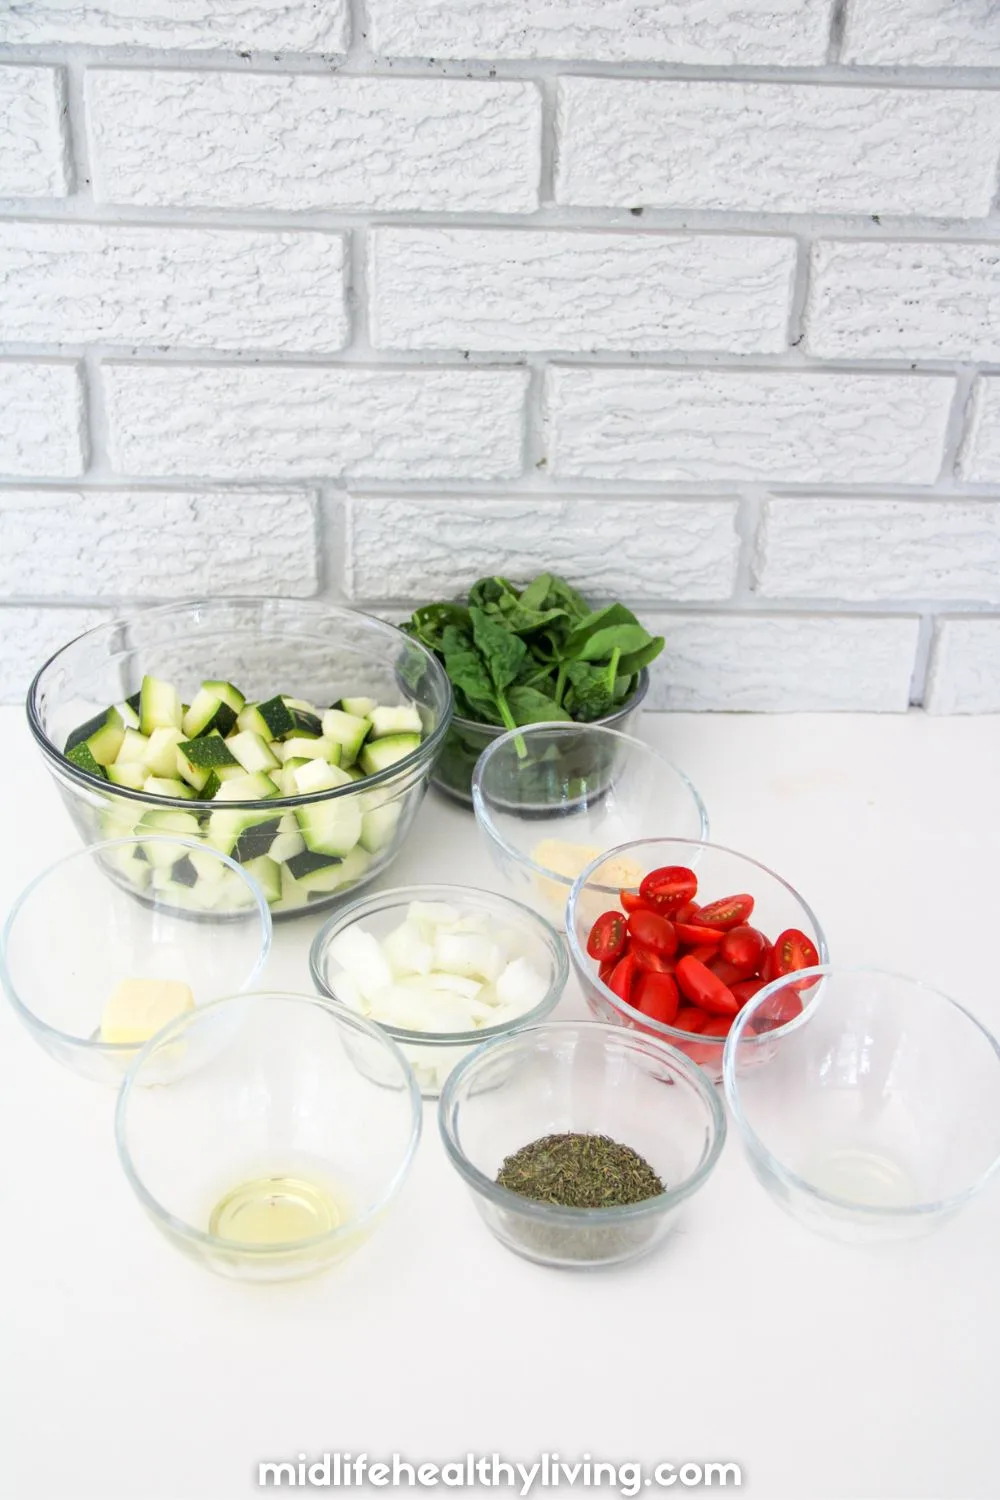 ingredients to make a zucchini skillet meal